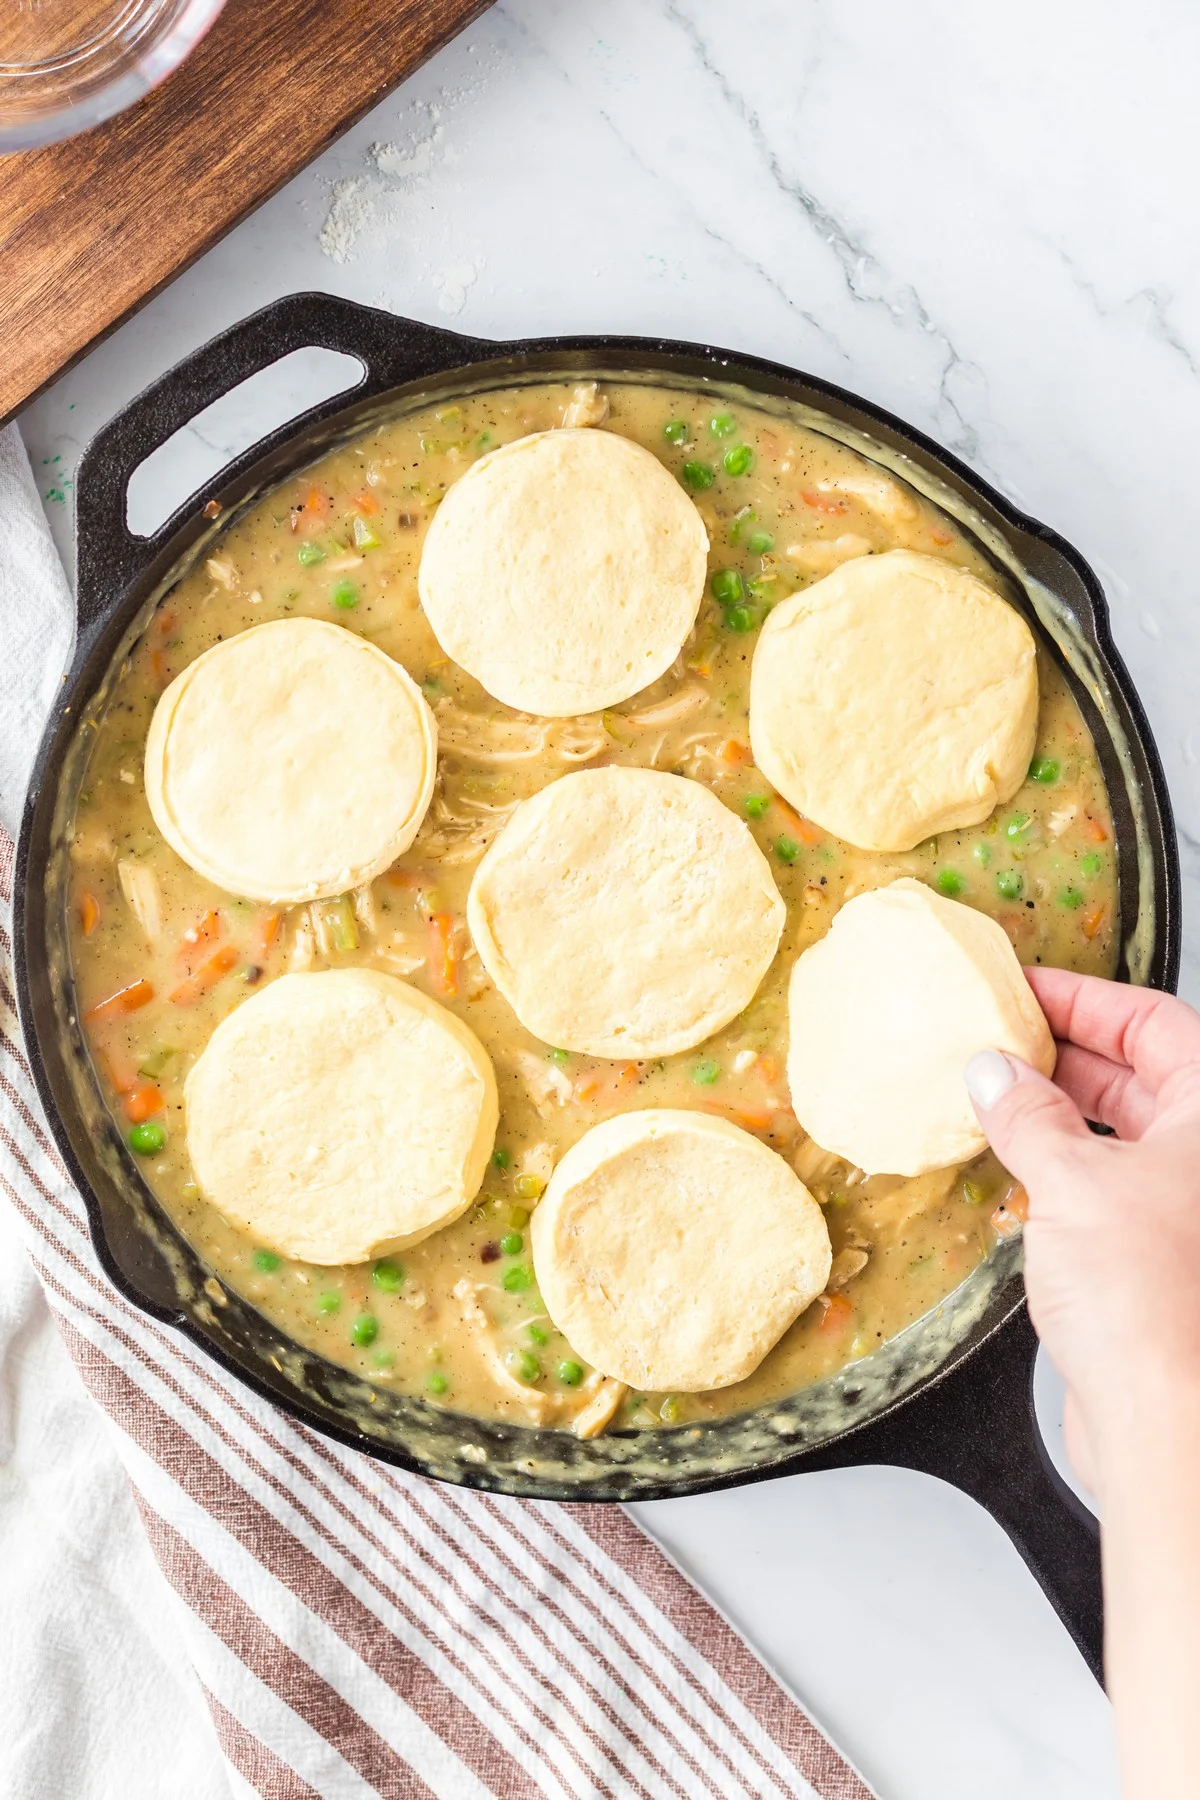 placing uncooked canned biscuits on top of chicken pot pie filling